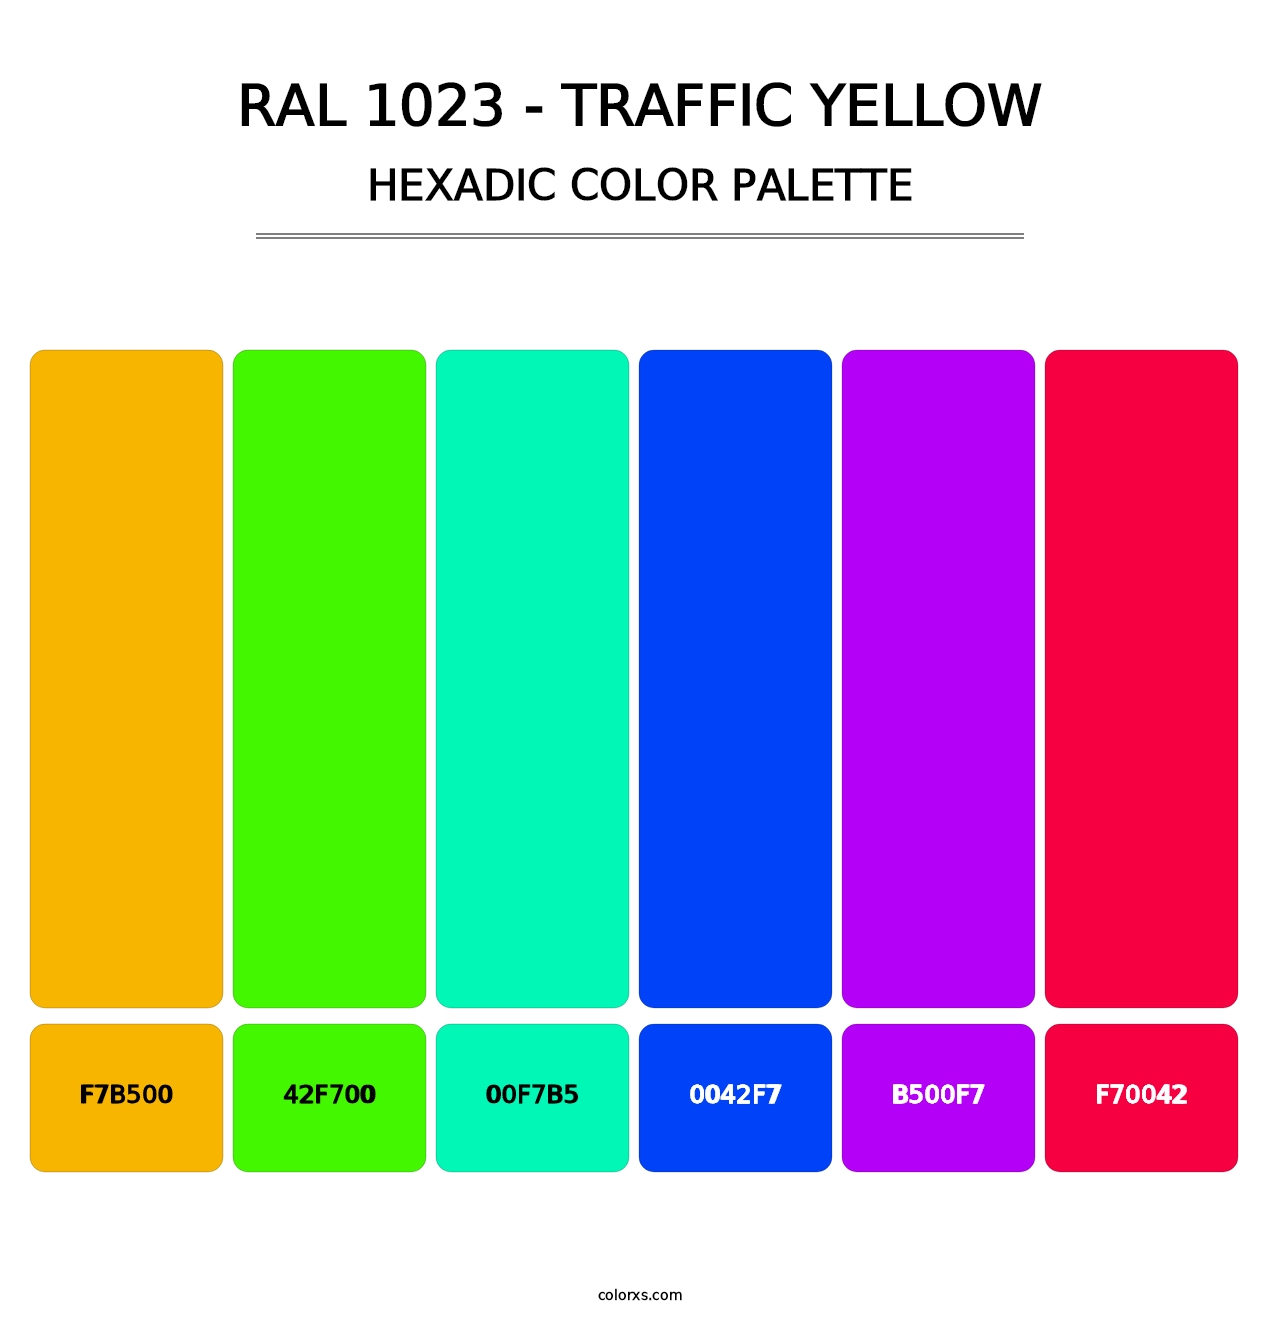 RAL 1023 - Traffic Yellow - Hexadic Color Palette